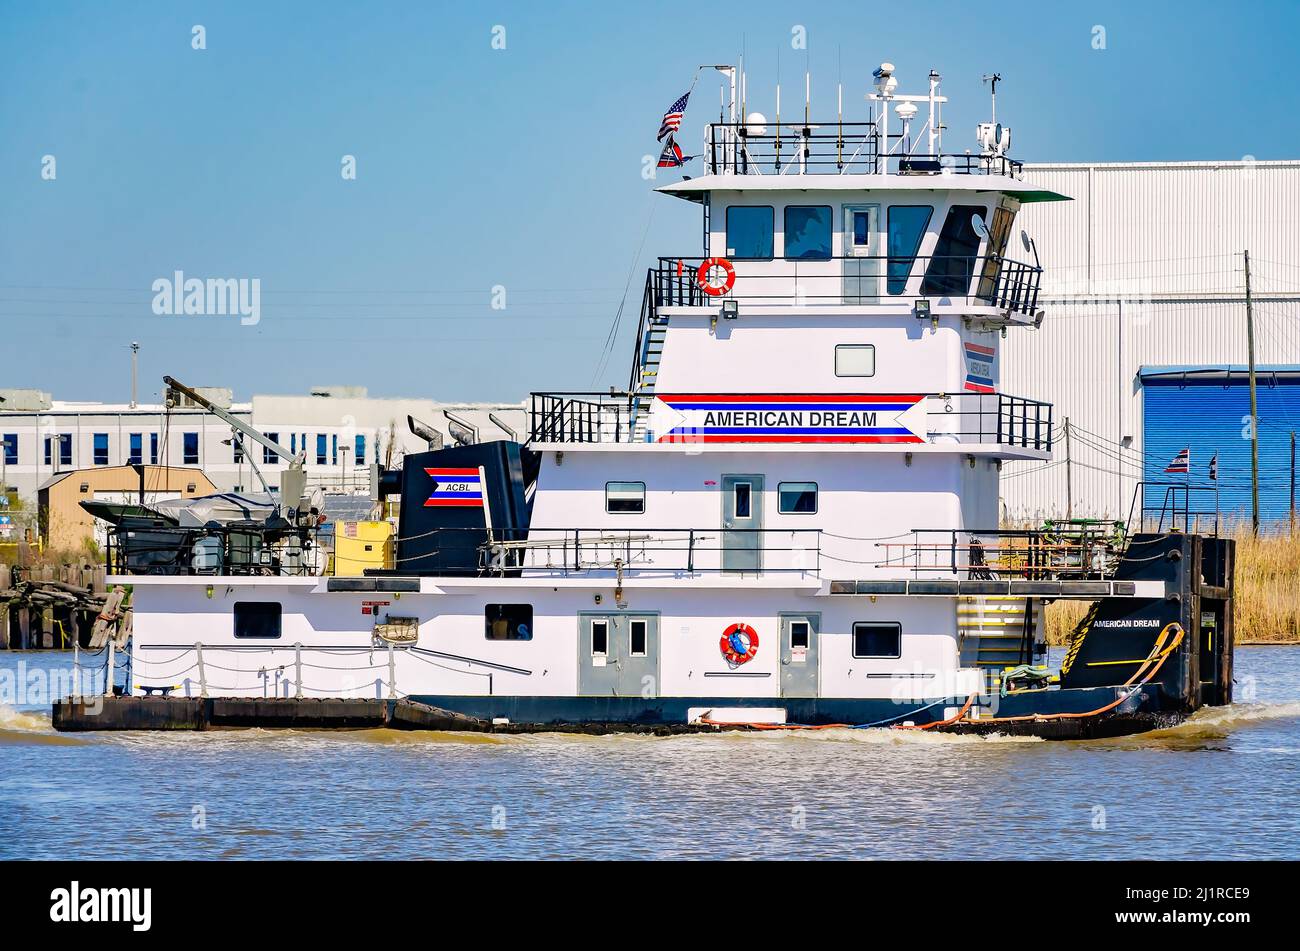 American Dream, a twin-screw towboat, is pictured on the Mobile River, March 25, 2022, in Mobile, Alabama. The ship was built in 2014. Stock Photo